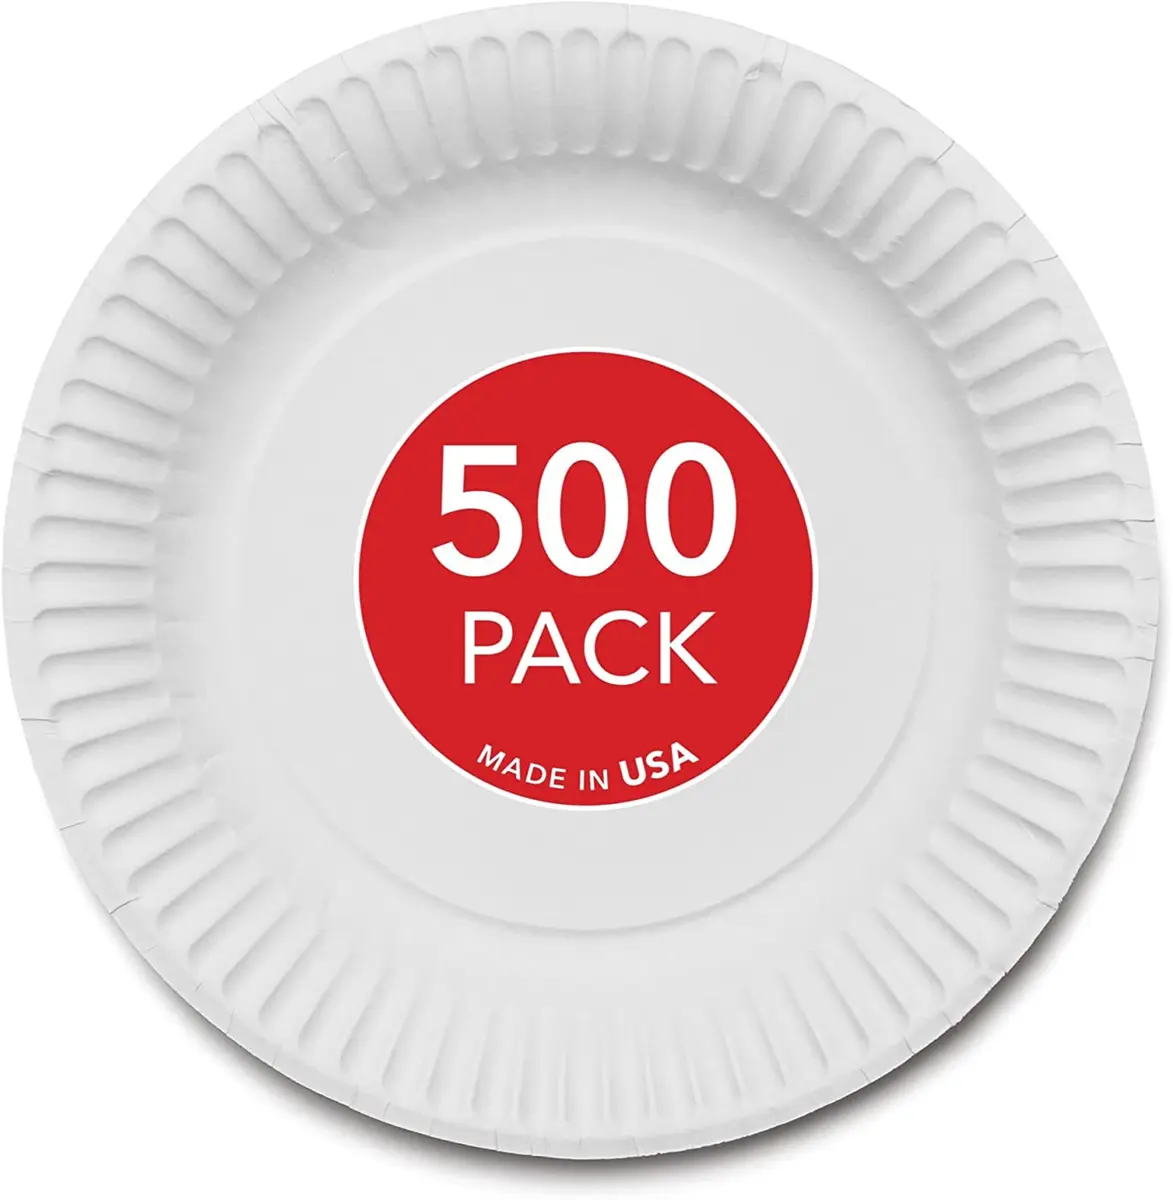 9-Inch Paper Plates Uncoated, Everyday Disposable Plates 9 Paper Plate  Bulk, Wh